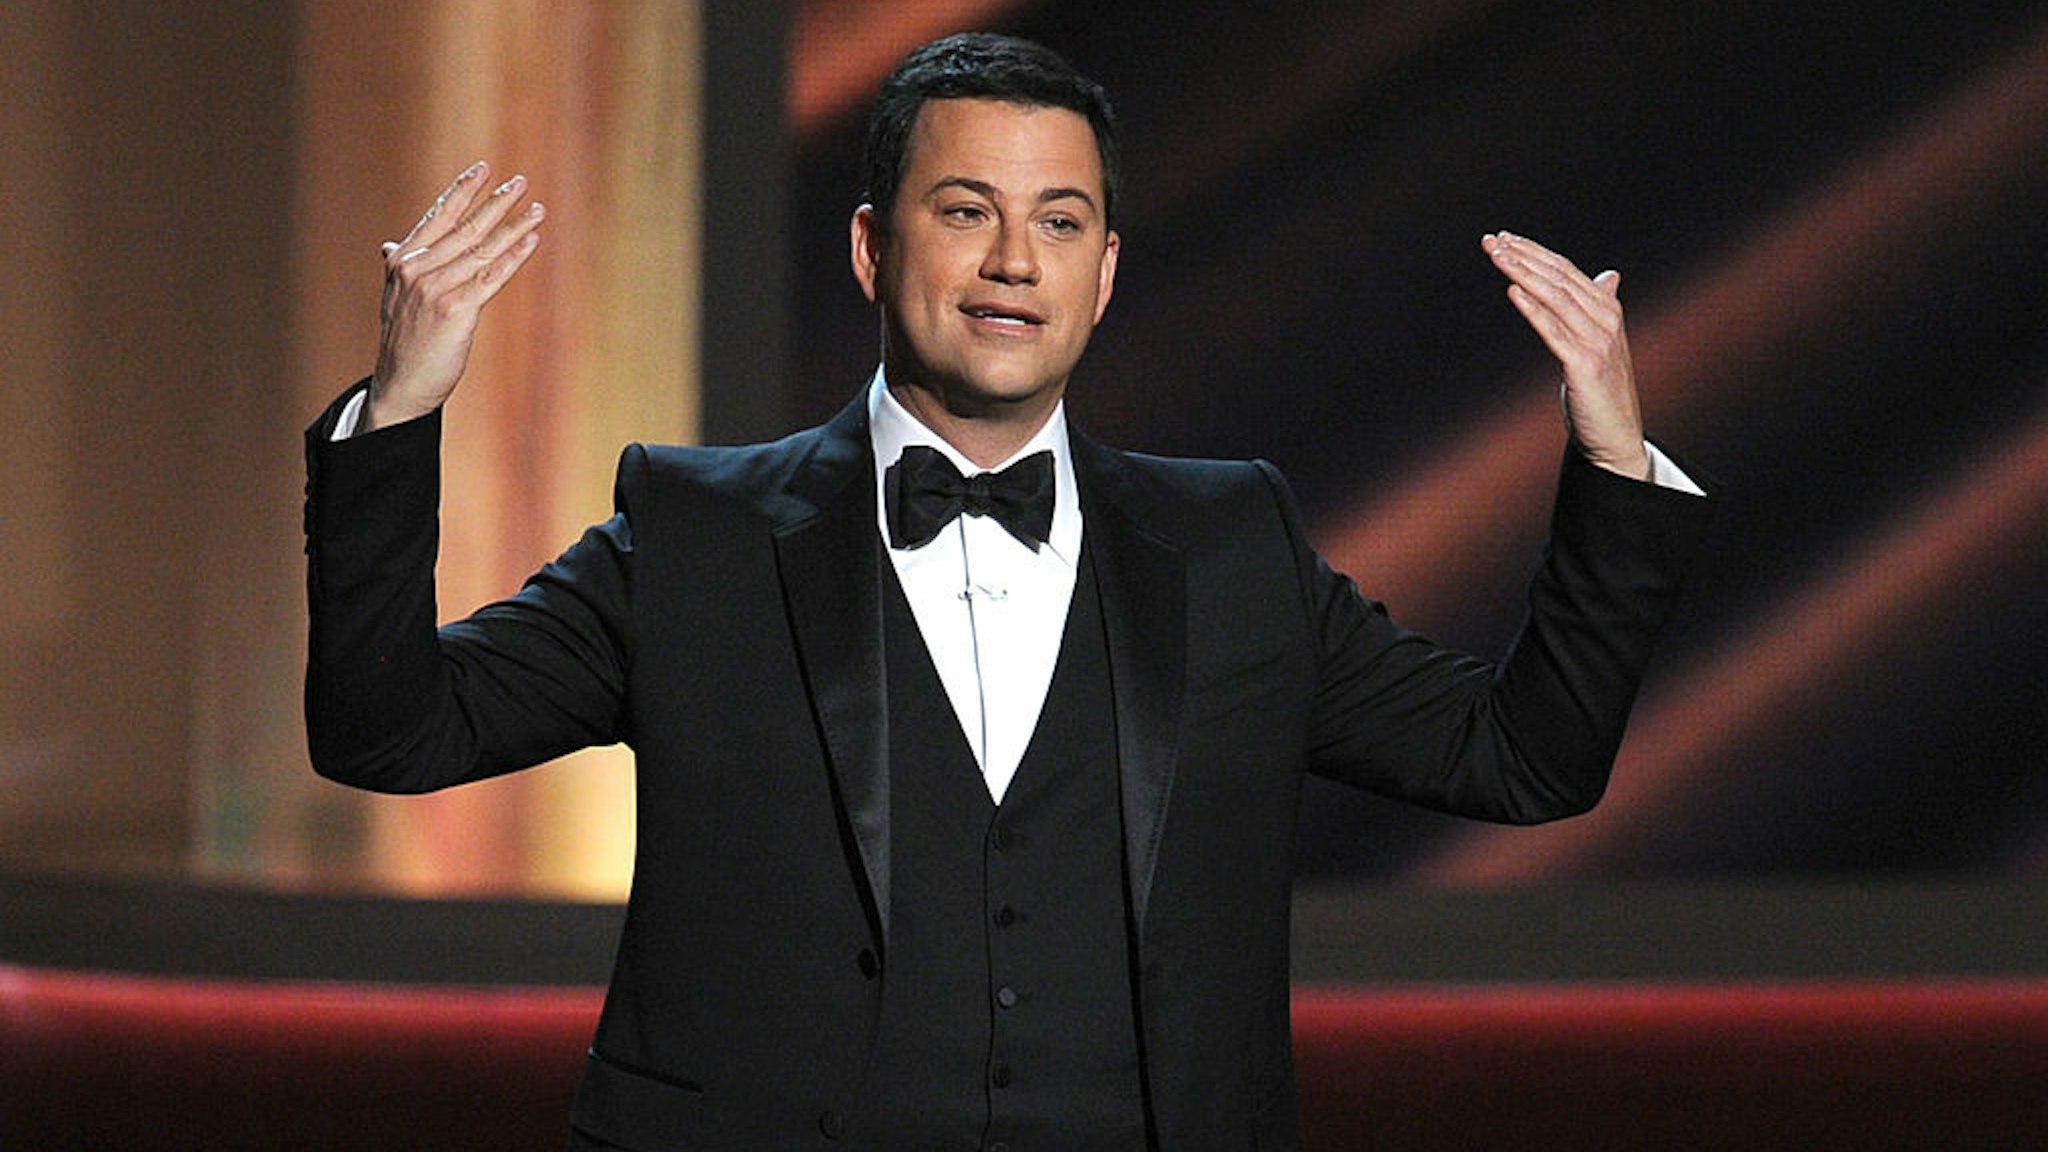 OS ANGELES, CA - SEPTEMBER 23: Host Jimmy Kimmel speaks onstage during the 64th Annual Primetime Emmy Awards at Nokia Theatre L.A. Live on September 23, 2012 in Los Angeles, California. (Photo by Kevin Winter/Getty Images)